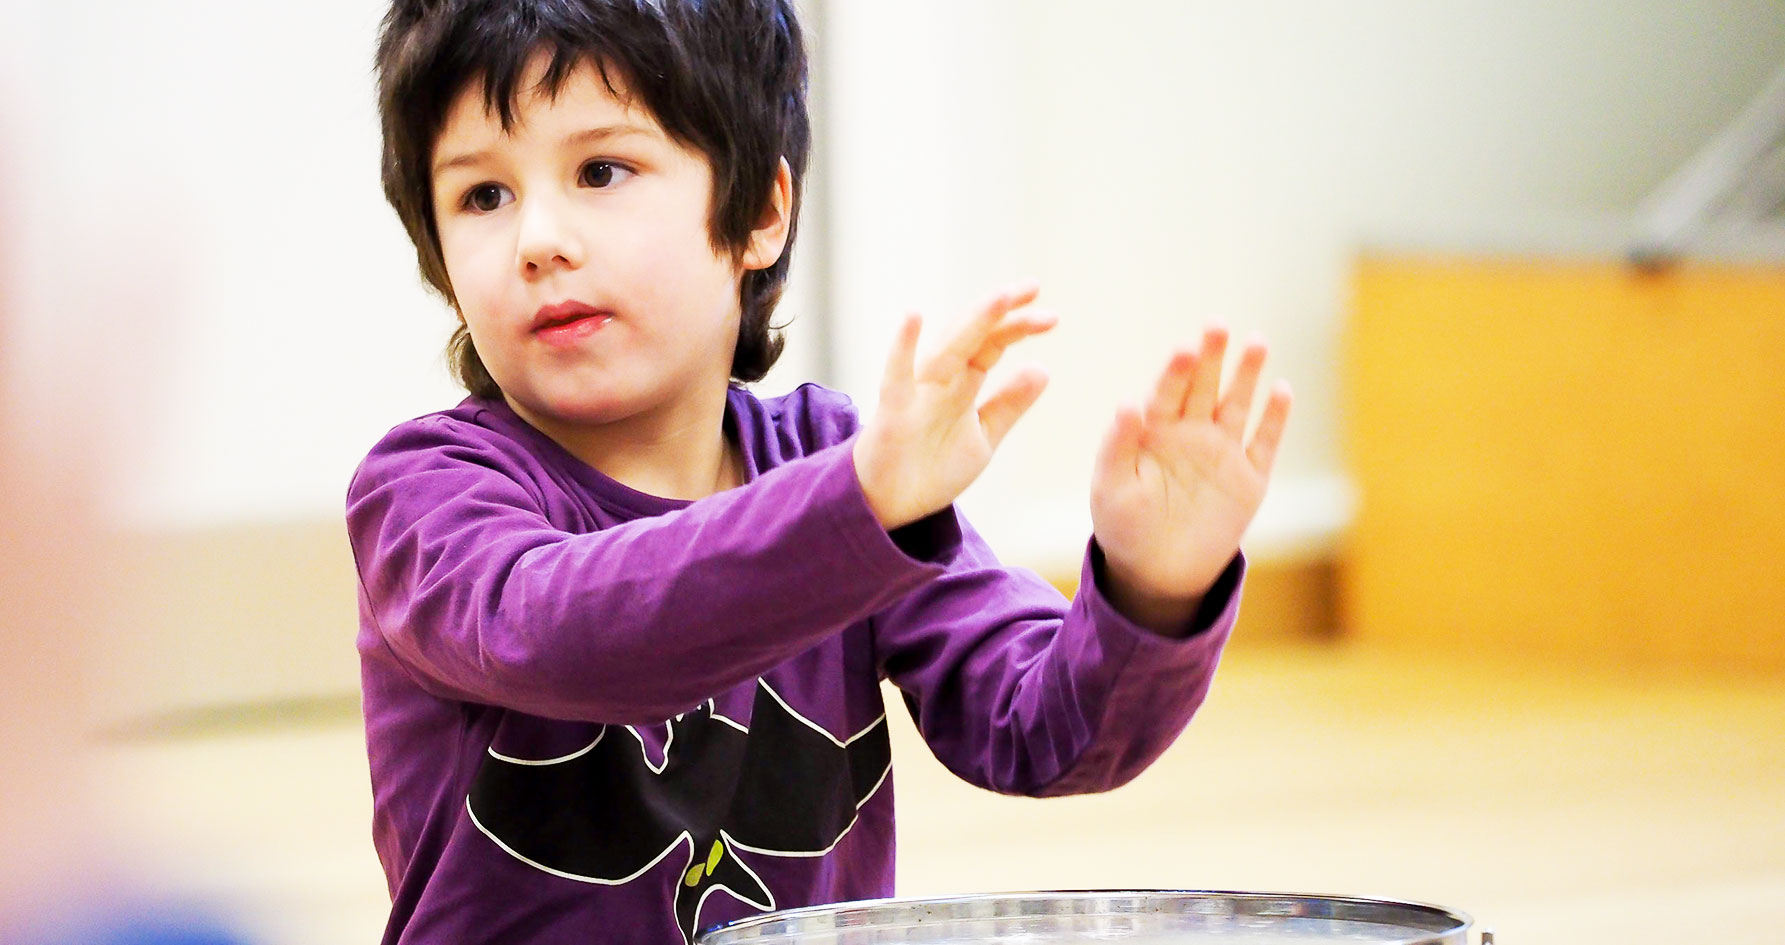 A boy learning percussion